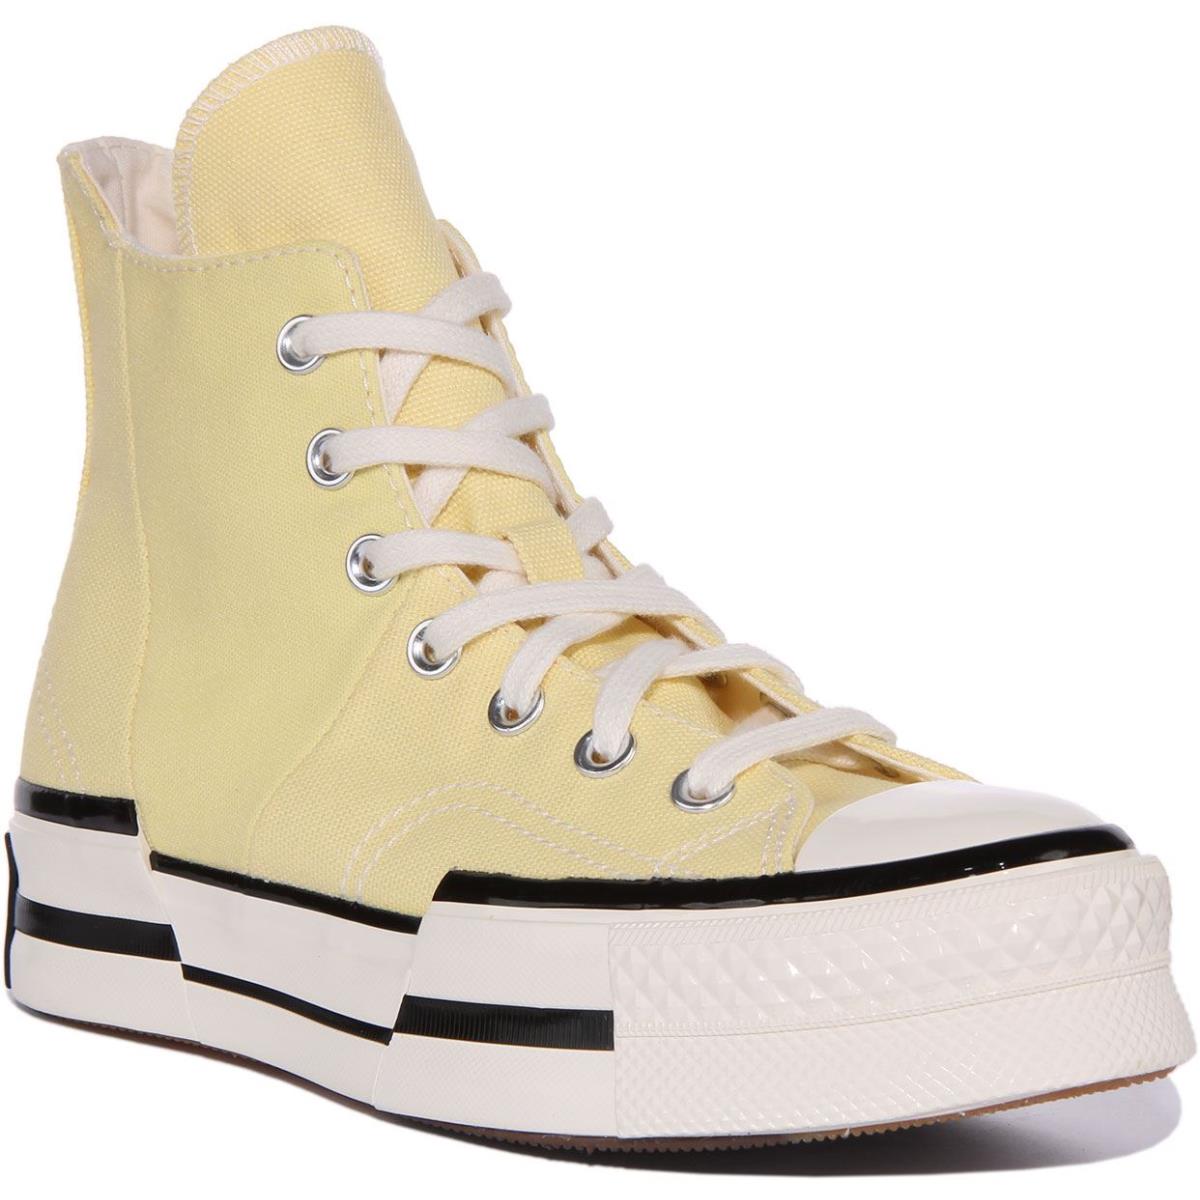 Converse A00740C Chuck 70 Plus Unisex Hi Sneakers In Yellow Size US 3 - 11 Yellow